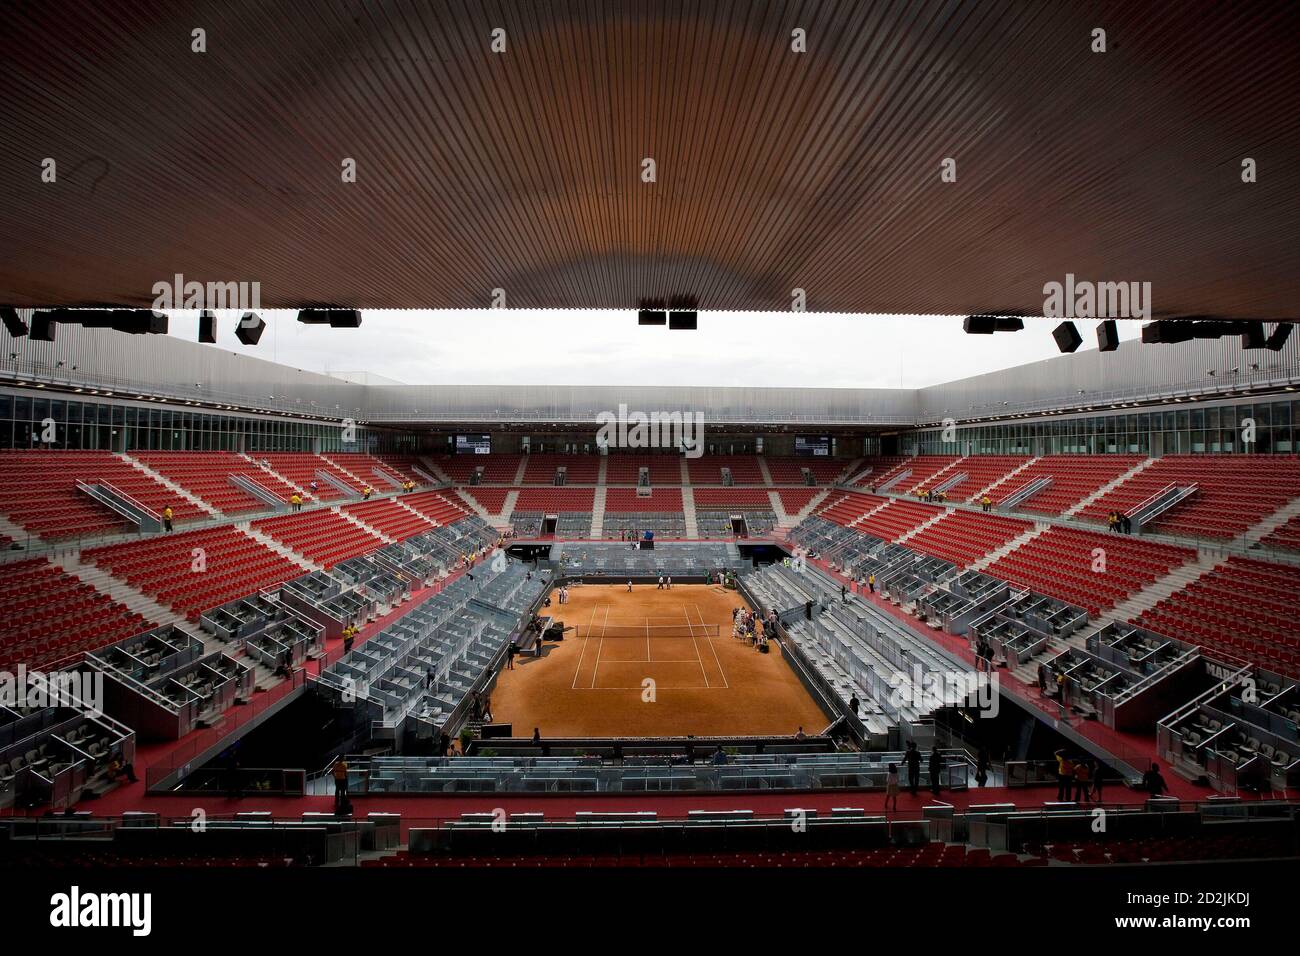 A general view of the new tennis stadium Caja Magica, or Magic Box, center  which will host the combined men's and women's Madrid Open starting May 9,  2009. The arena grounds feature